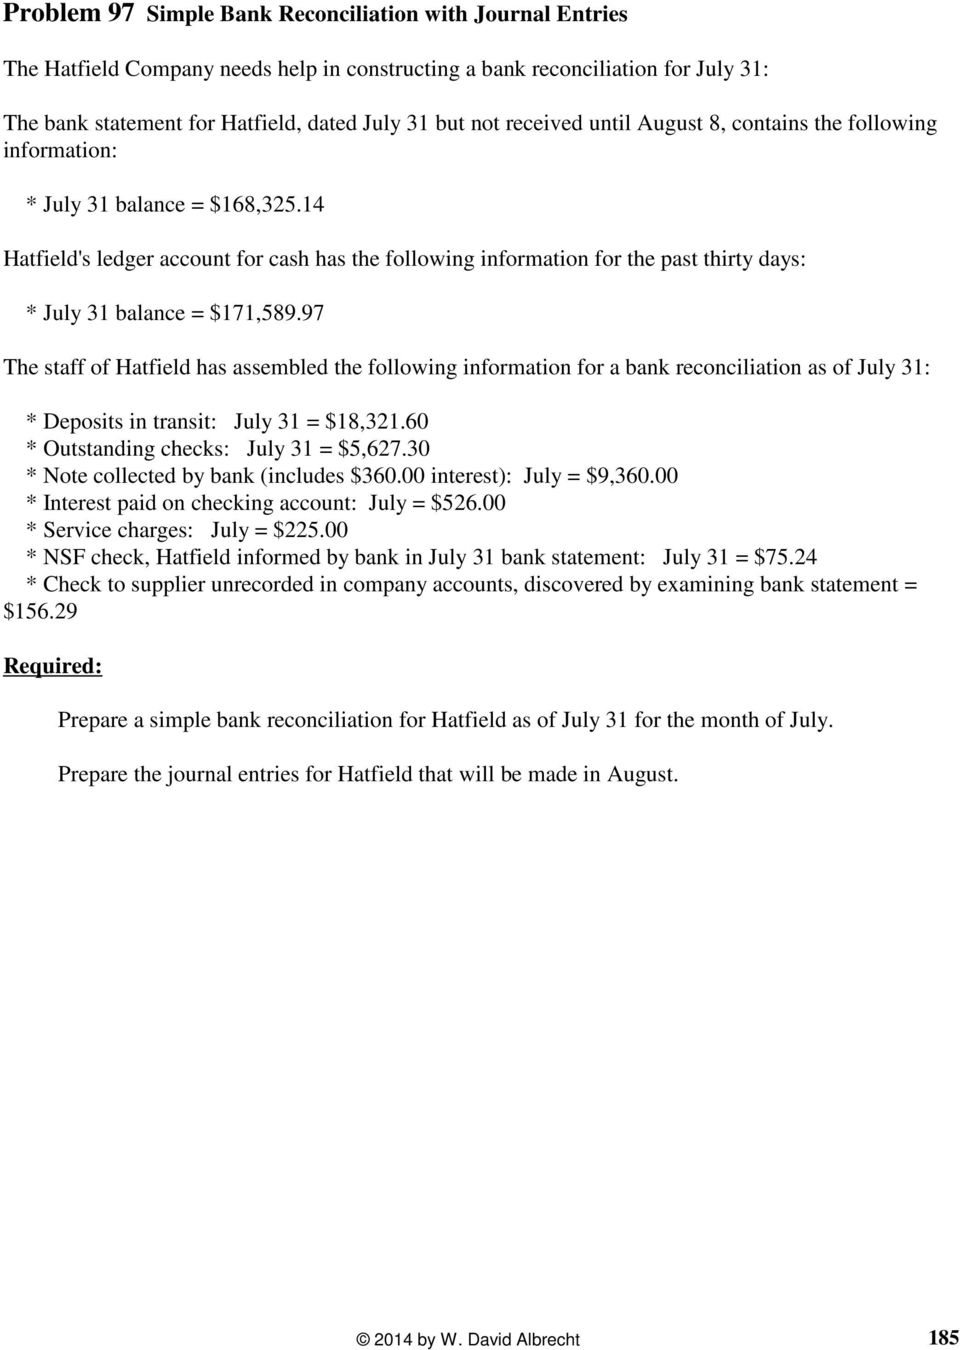 97 The staff of Hatfield has assembled the following information for a bank reconciliation as of July 31: * Deposits in transit: July 31 = $18,321.60 * Outstanding checks: July 31 = $5,627.